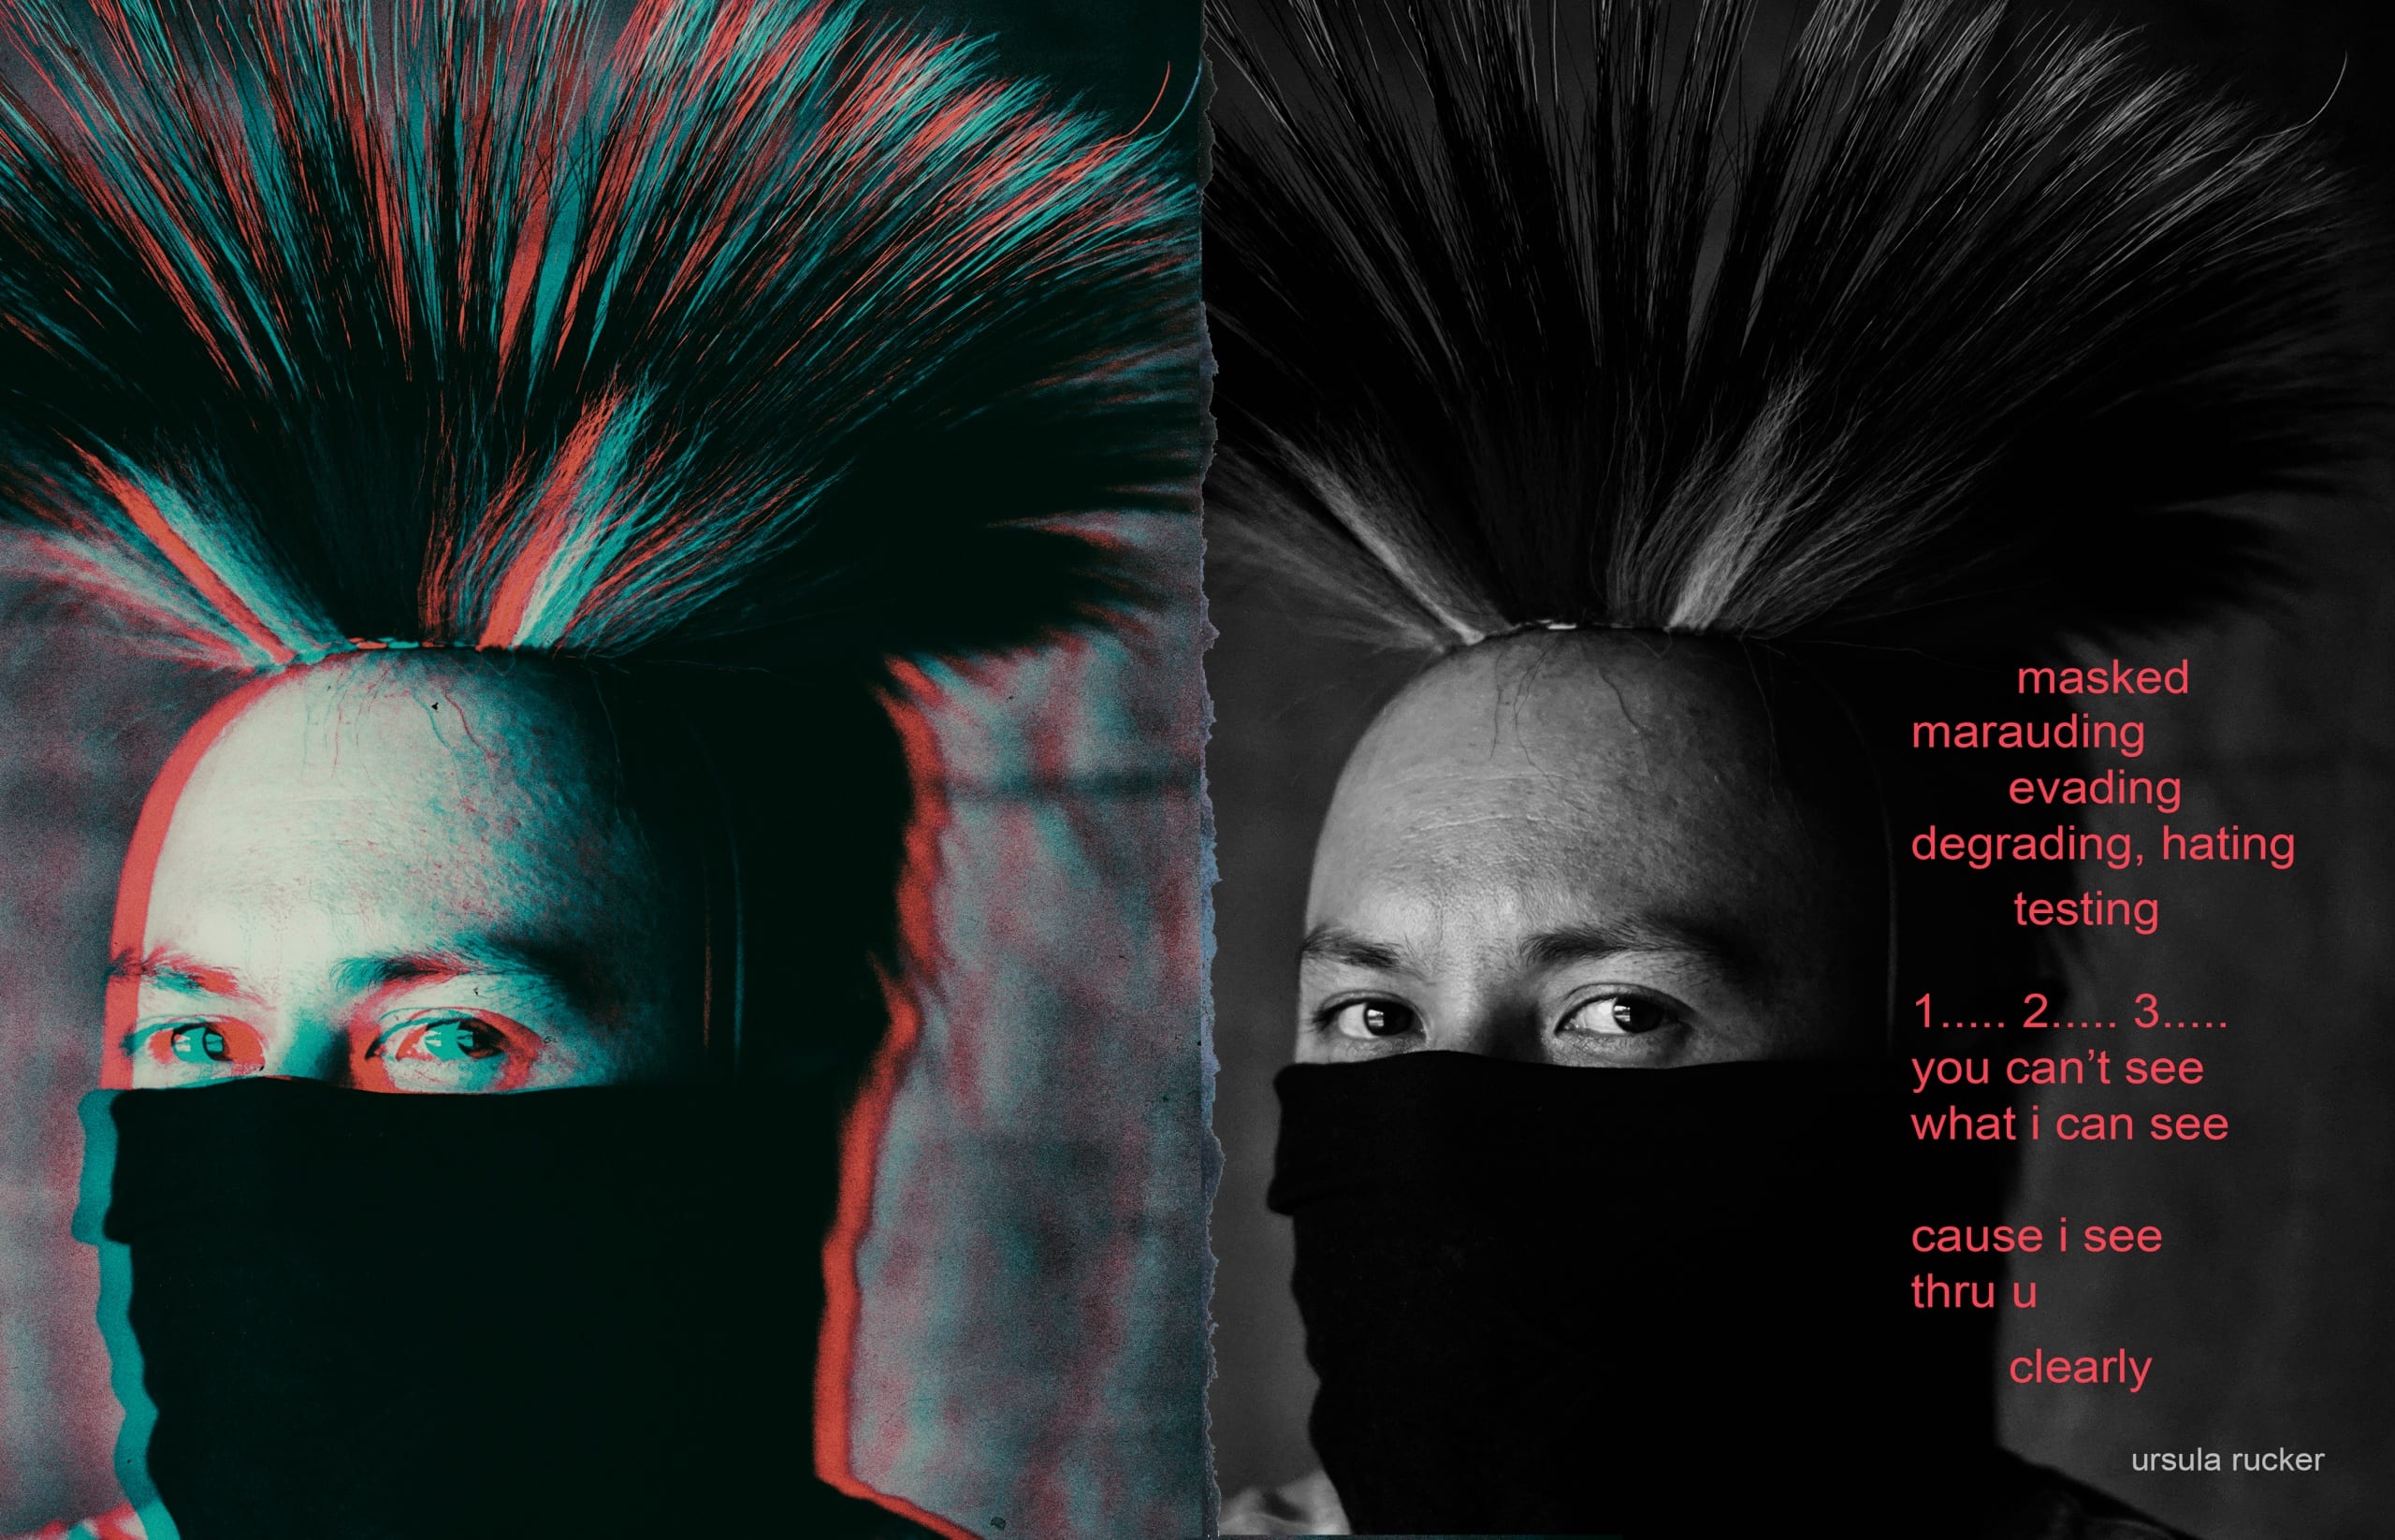 Doubled image of a young Indigenous man wearing a grass dancer’s roach and a black cloth mask pulled up to just below his eyes; image on left is color separated, so it appears as "3-D;" a poem appears in red text on the right side of the spread